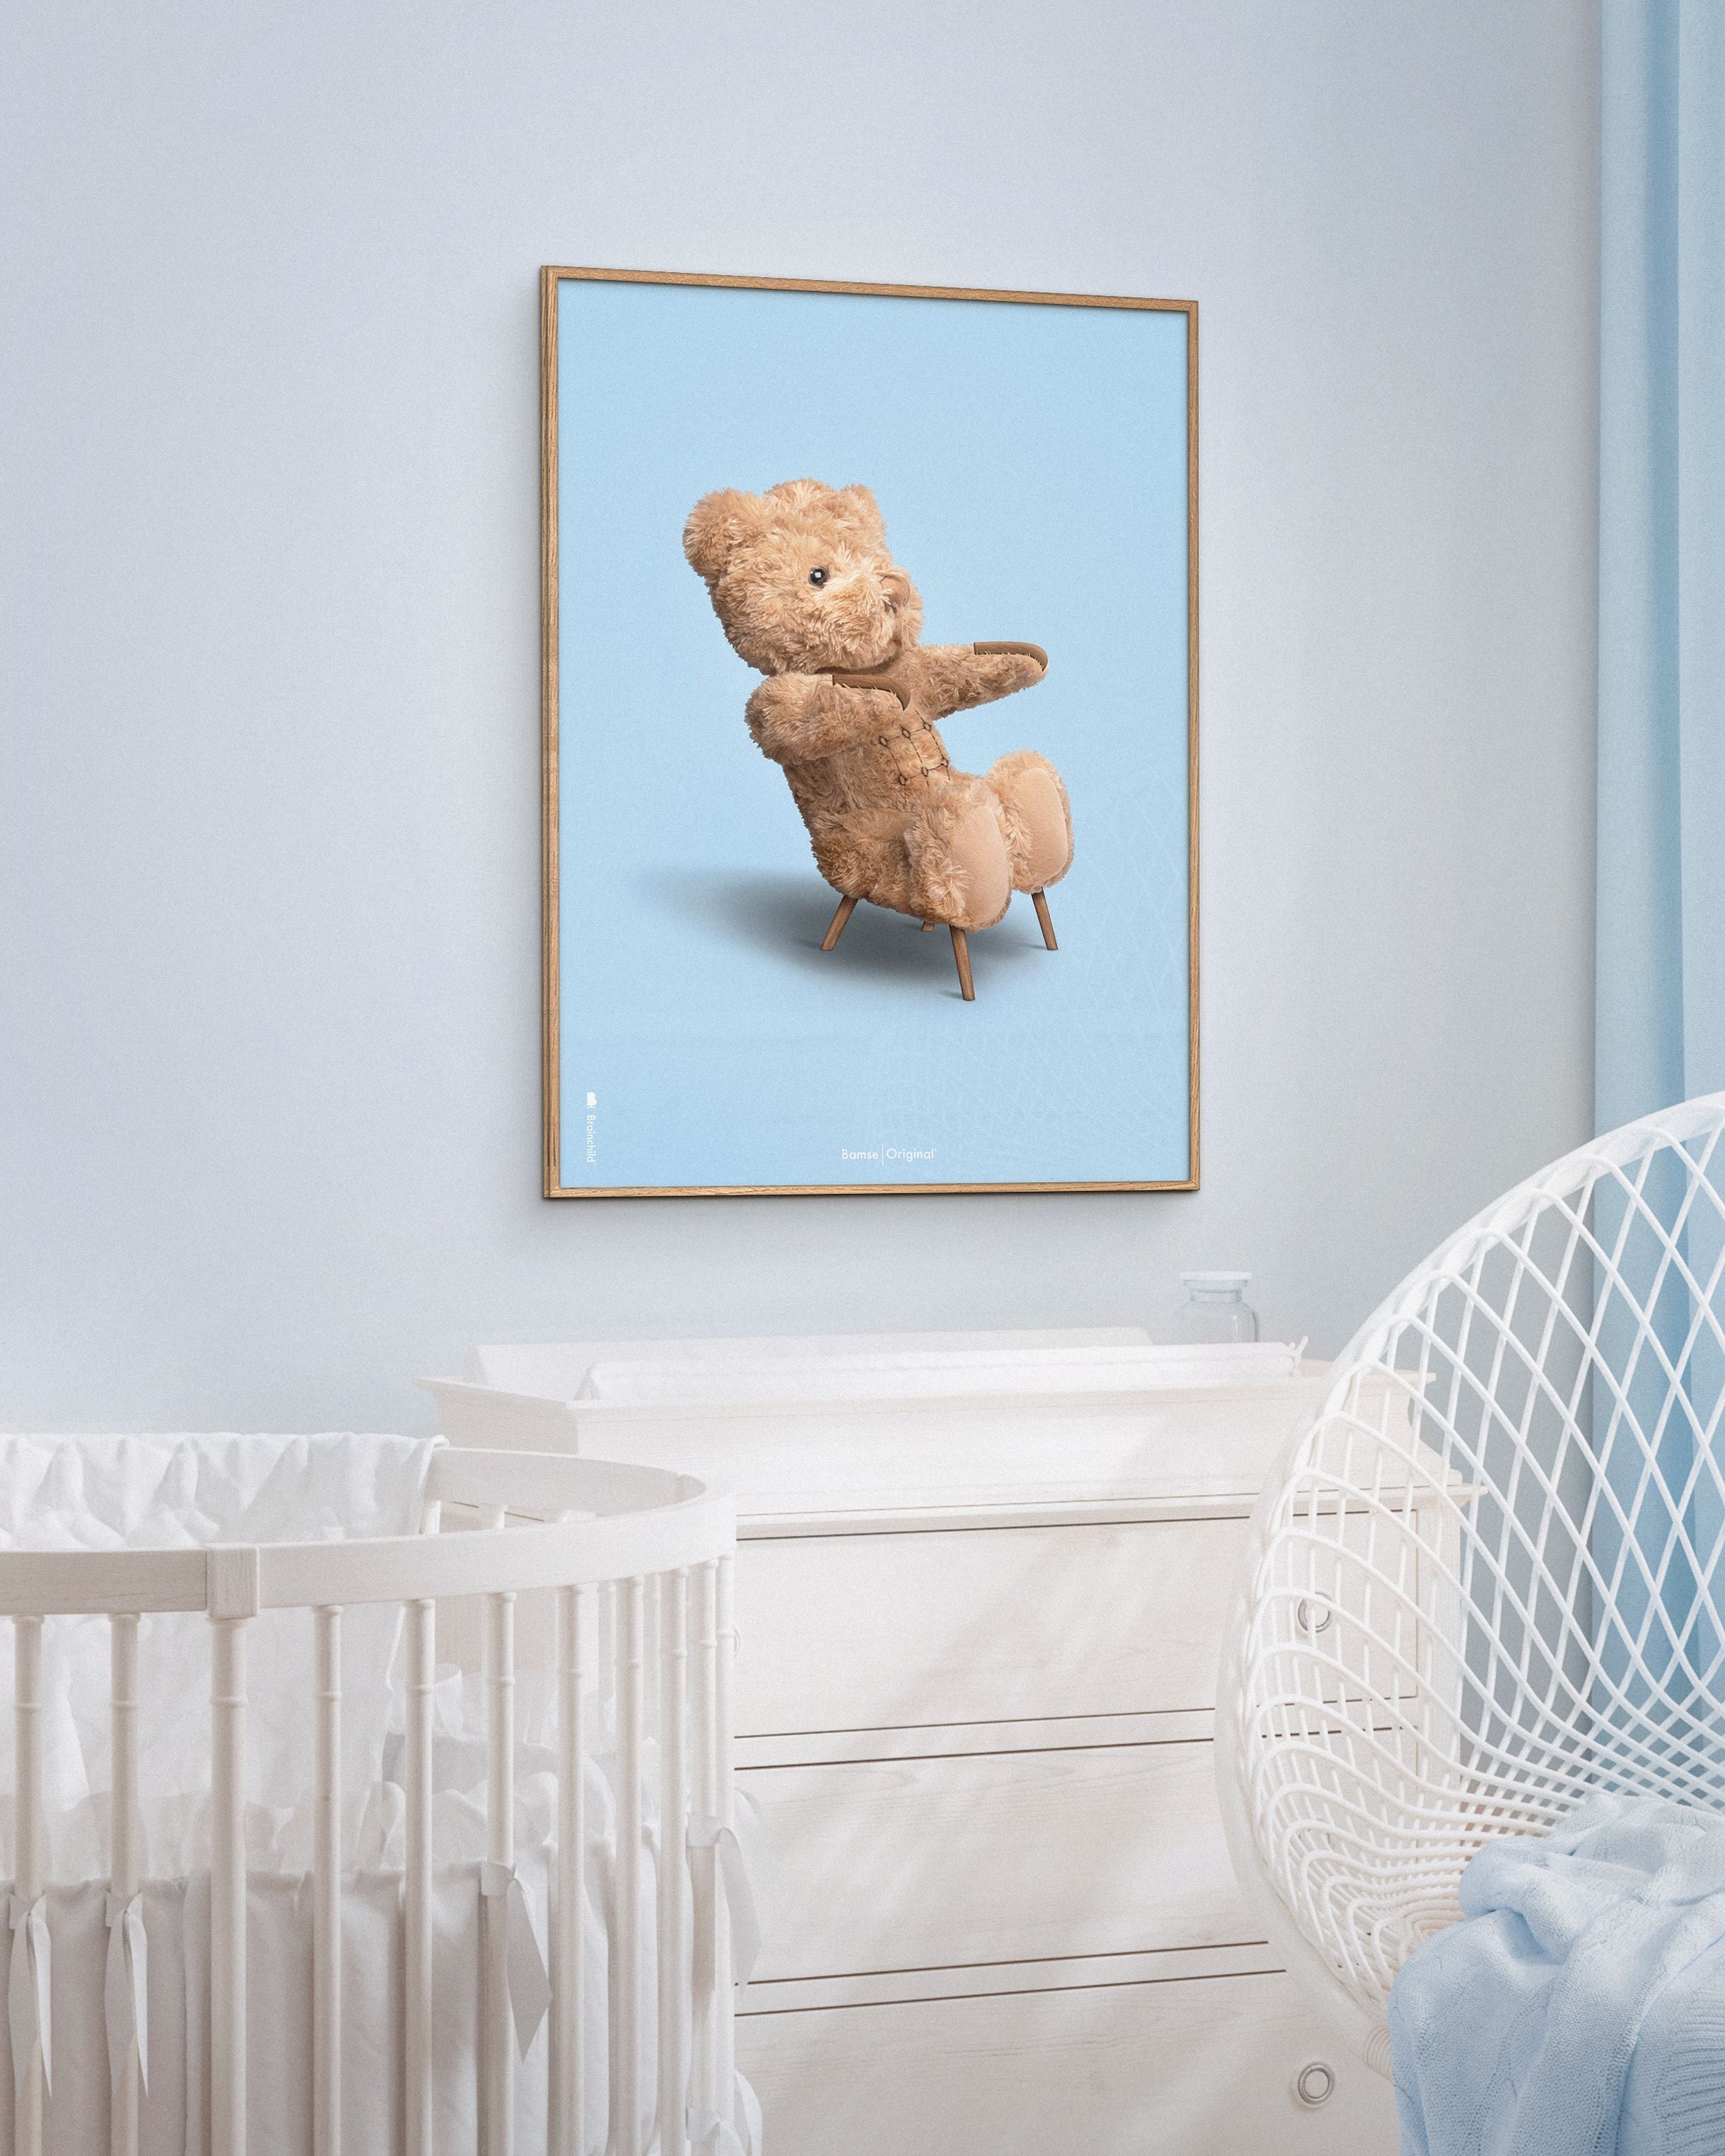 Brainchild Teddy Bear Classic Poster Frame Made Of Black Lacquered Wood 70x100 Cm, Light Blue Background